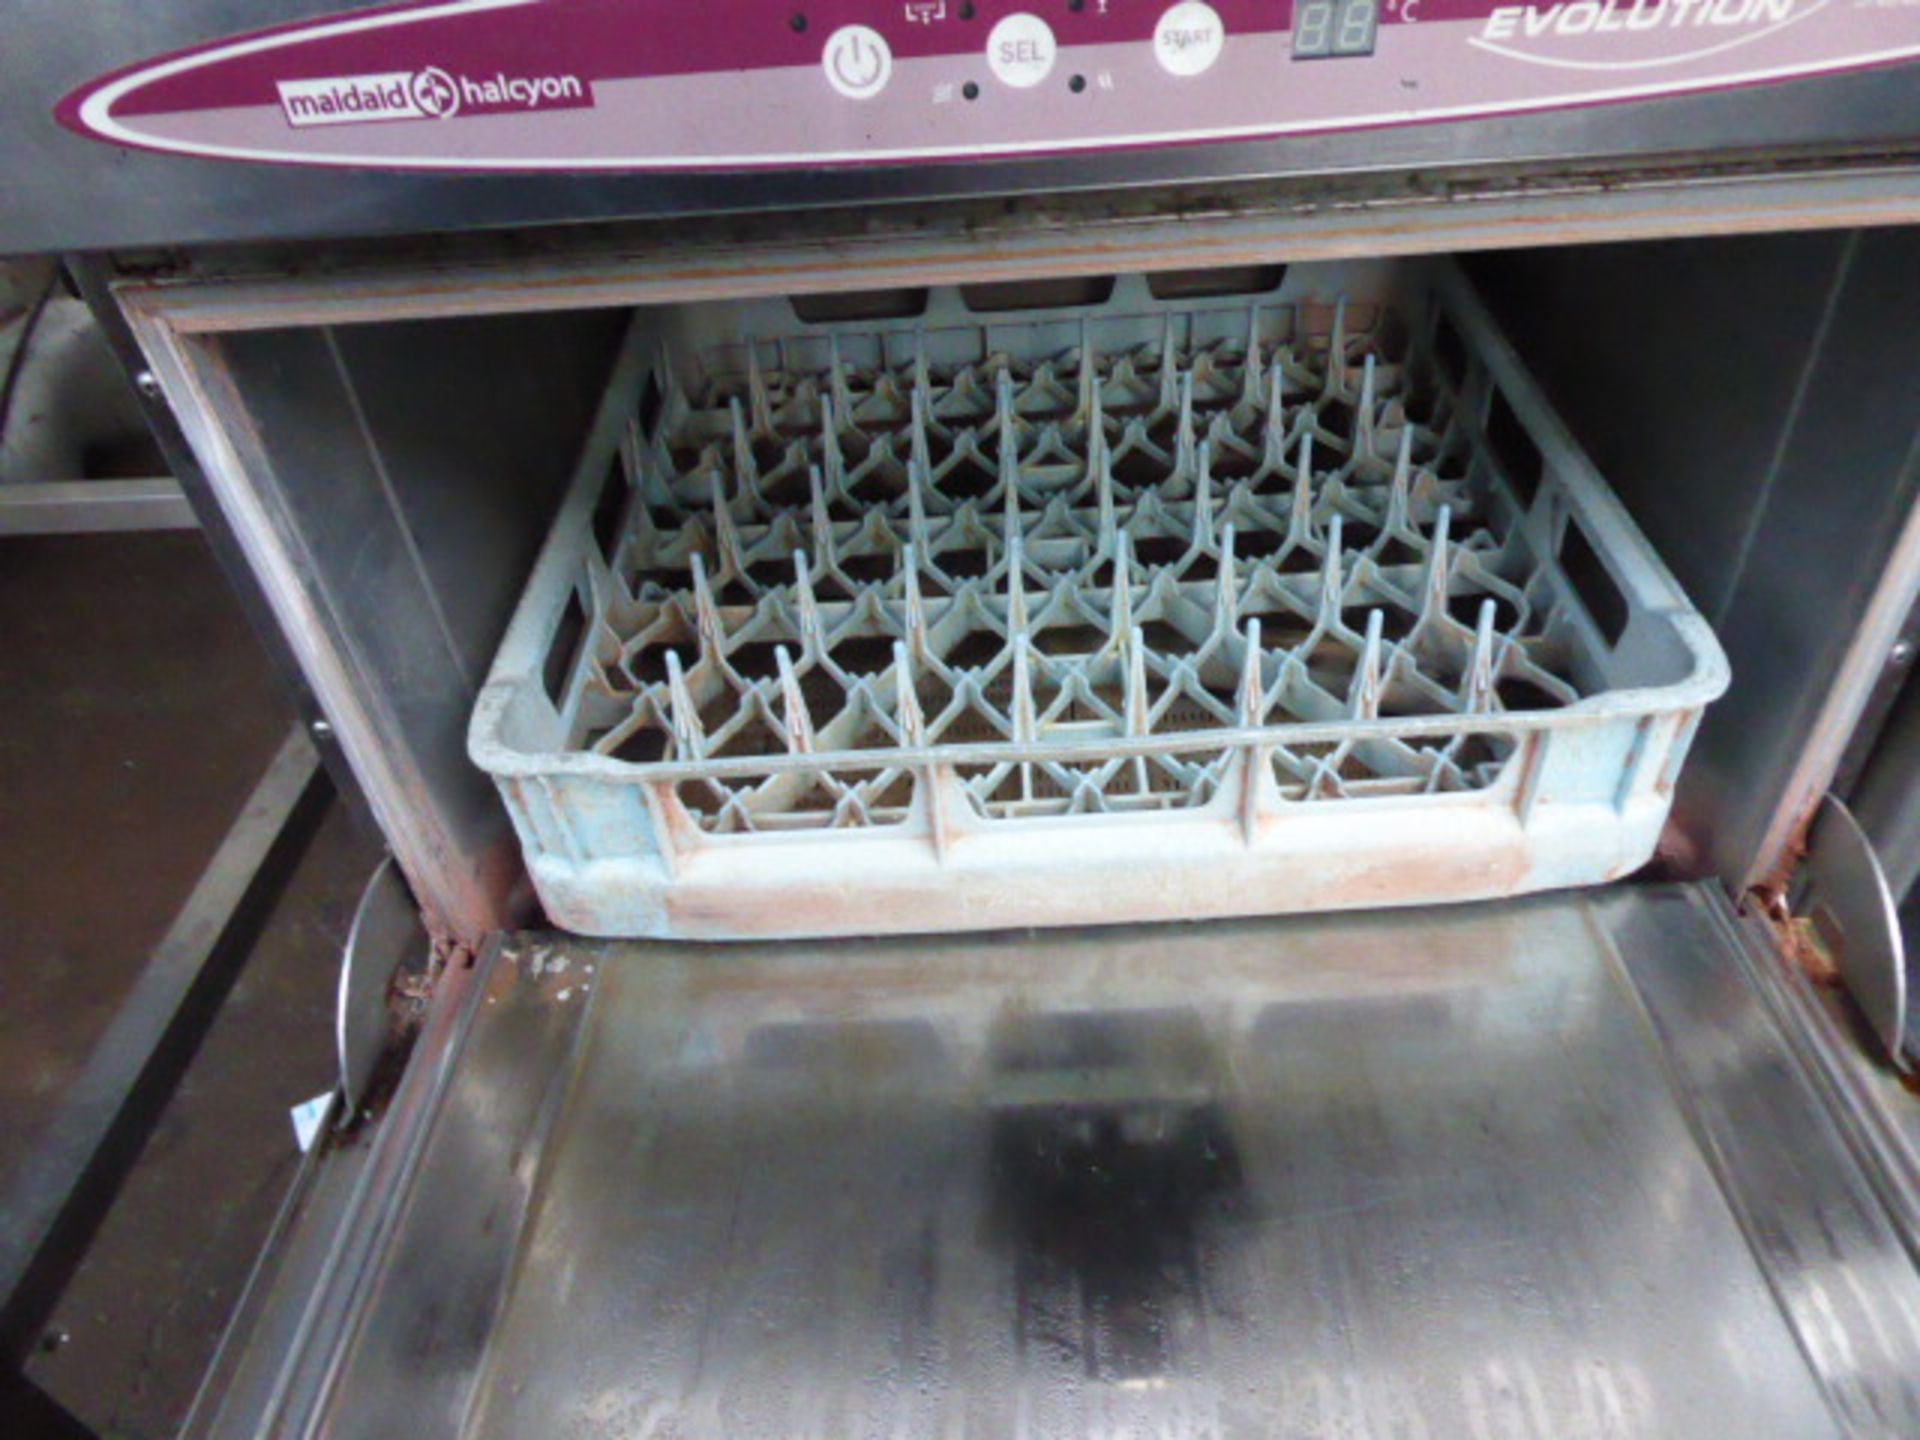 60cm Maidaid Halcyon Evolution 500 under counter washer - Image 2 of 2